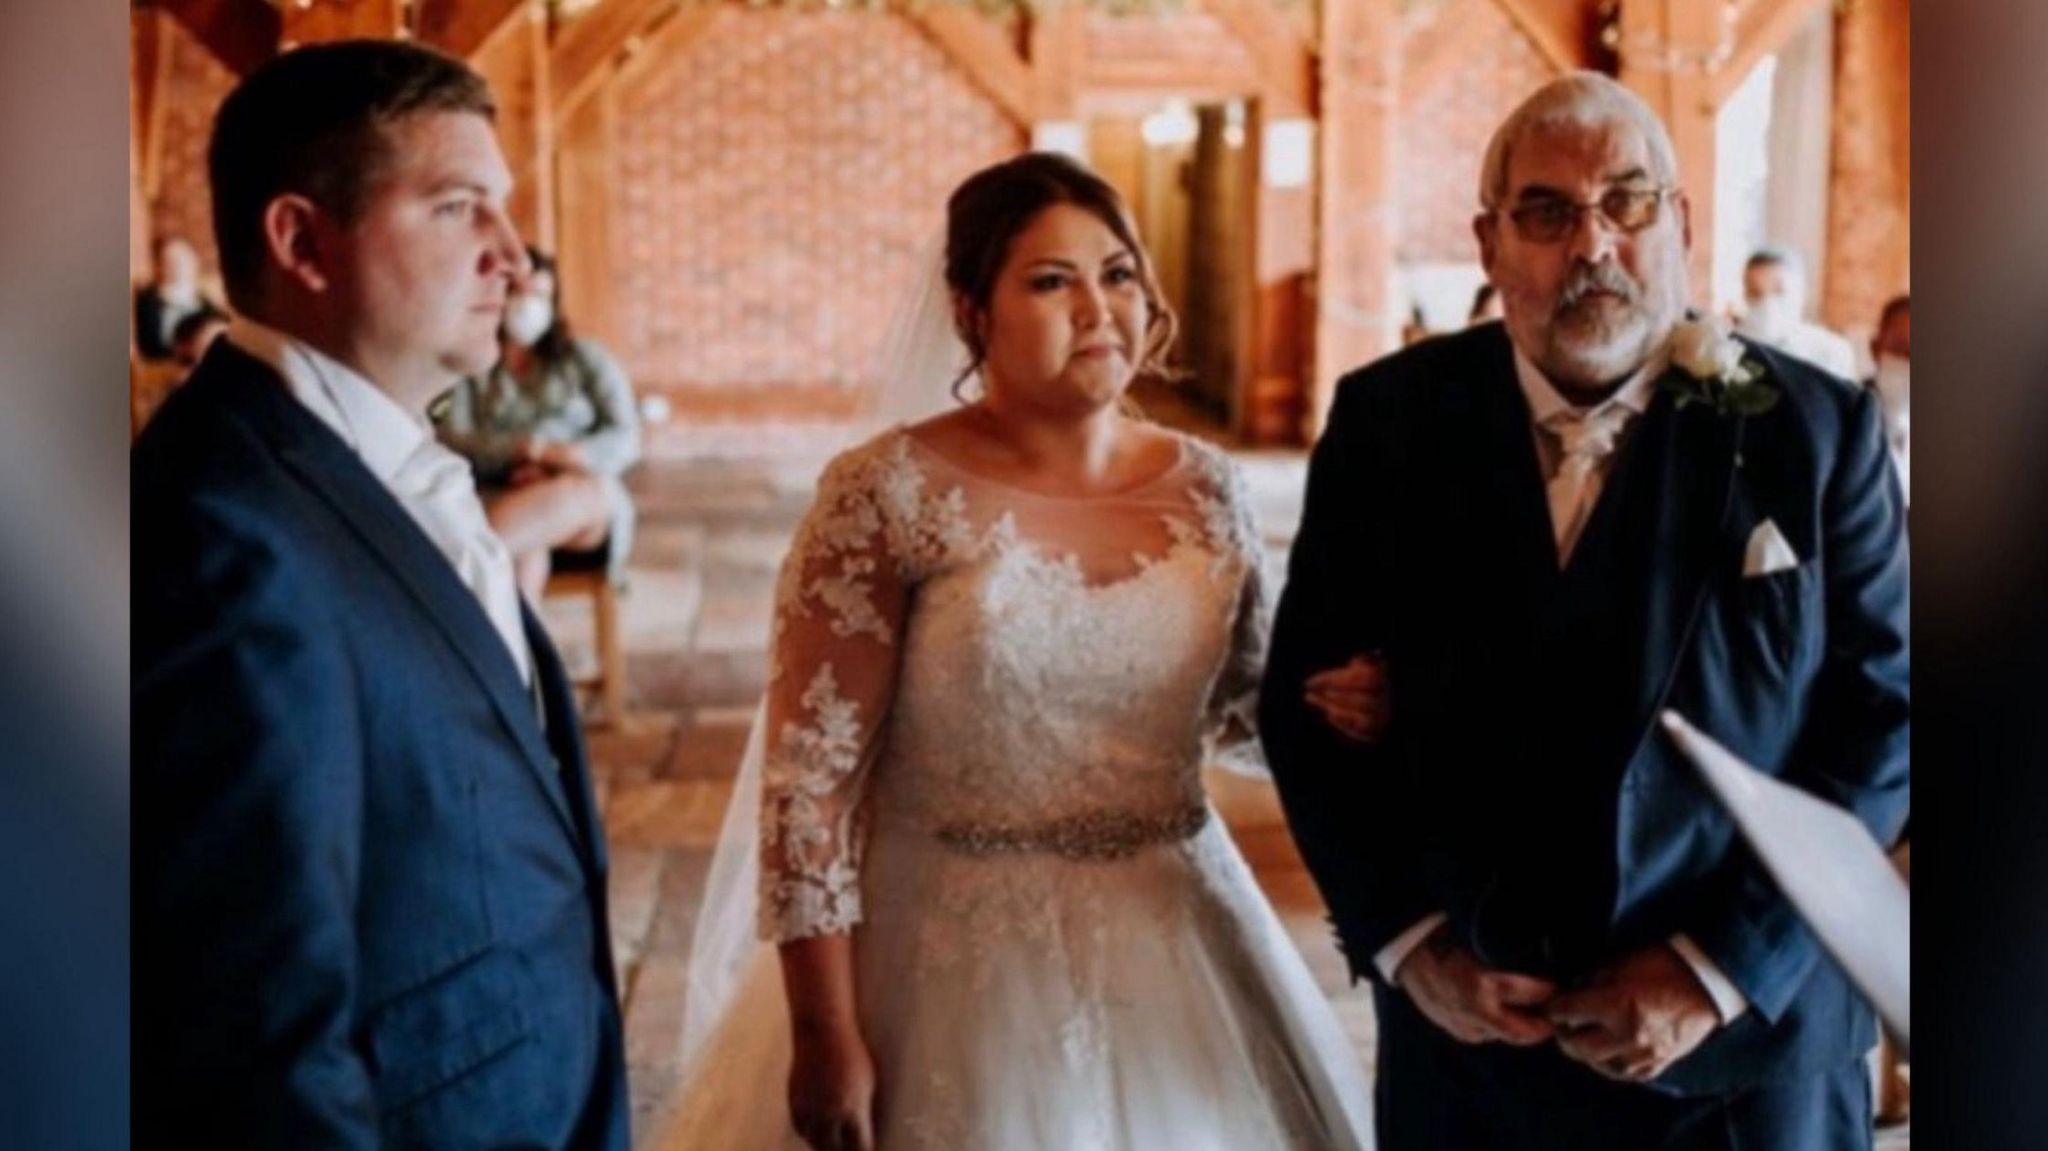 A woman in a long-sleeved white lace wedding dress stands between her husband and father in navy blue suits on her wedding day